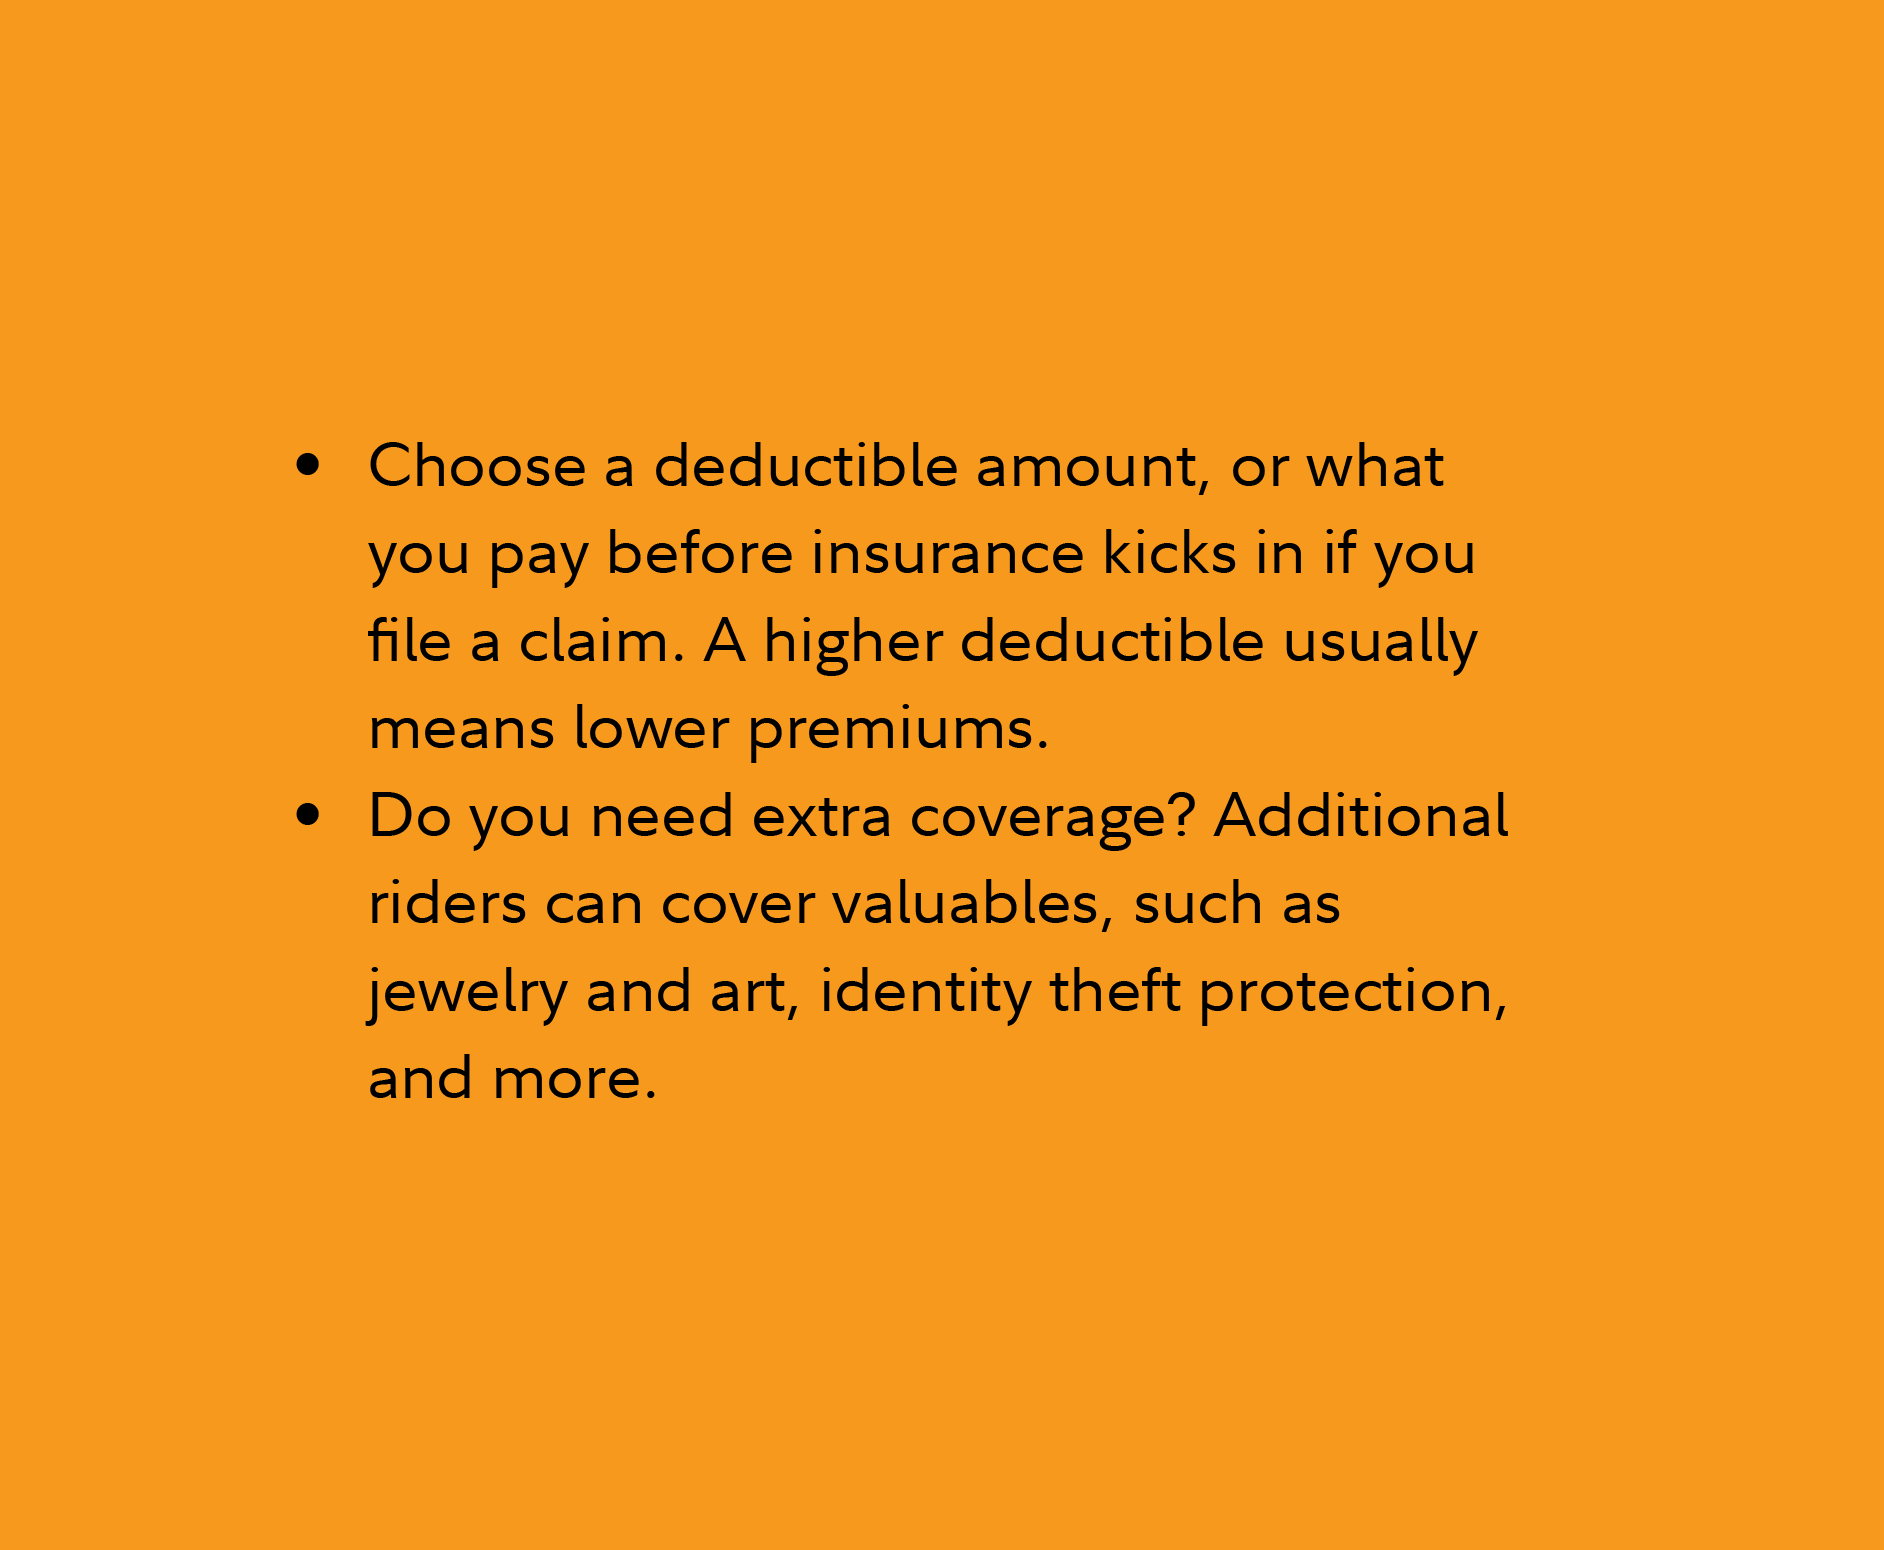 Choose a deductible amount, or what you pay before insurance kicks in if you file a claim. A higher deductible usually means lower premiums. Do you need extra coverage? Additional riders can cover valuables, such as jewelry and art, identity theft protection, and more. 